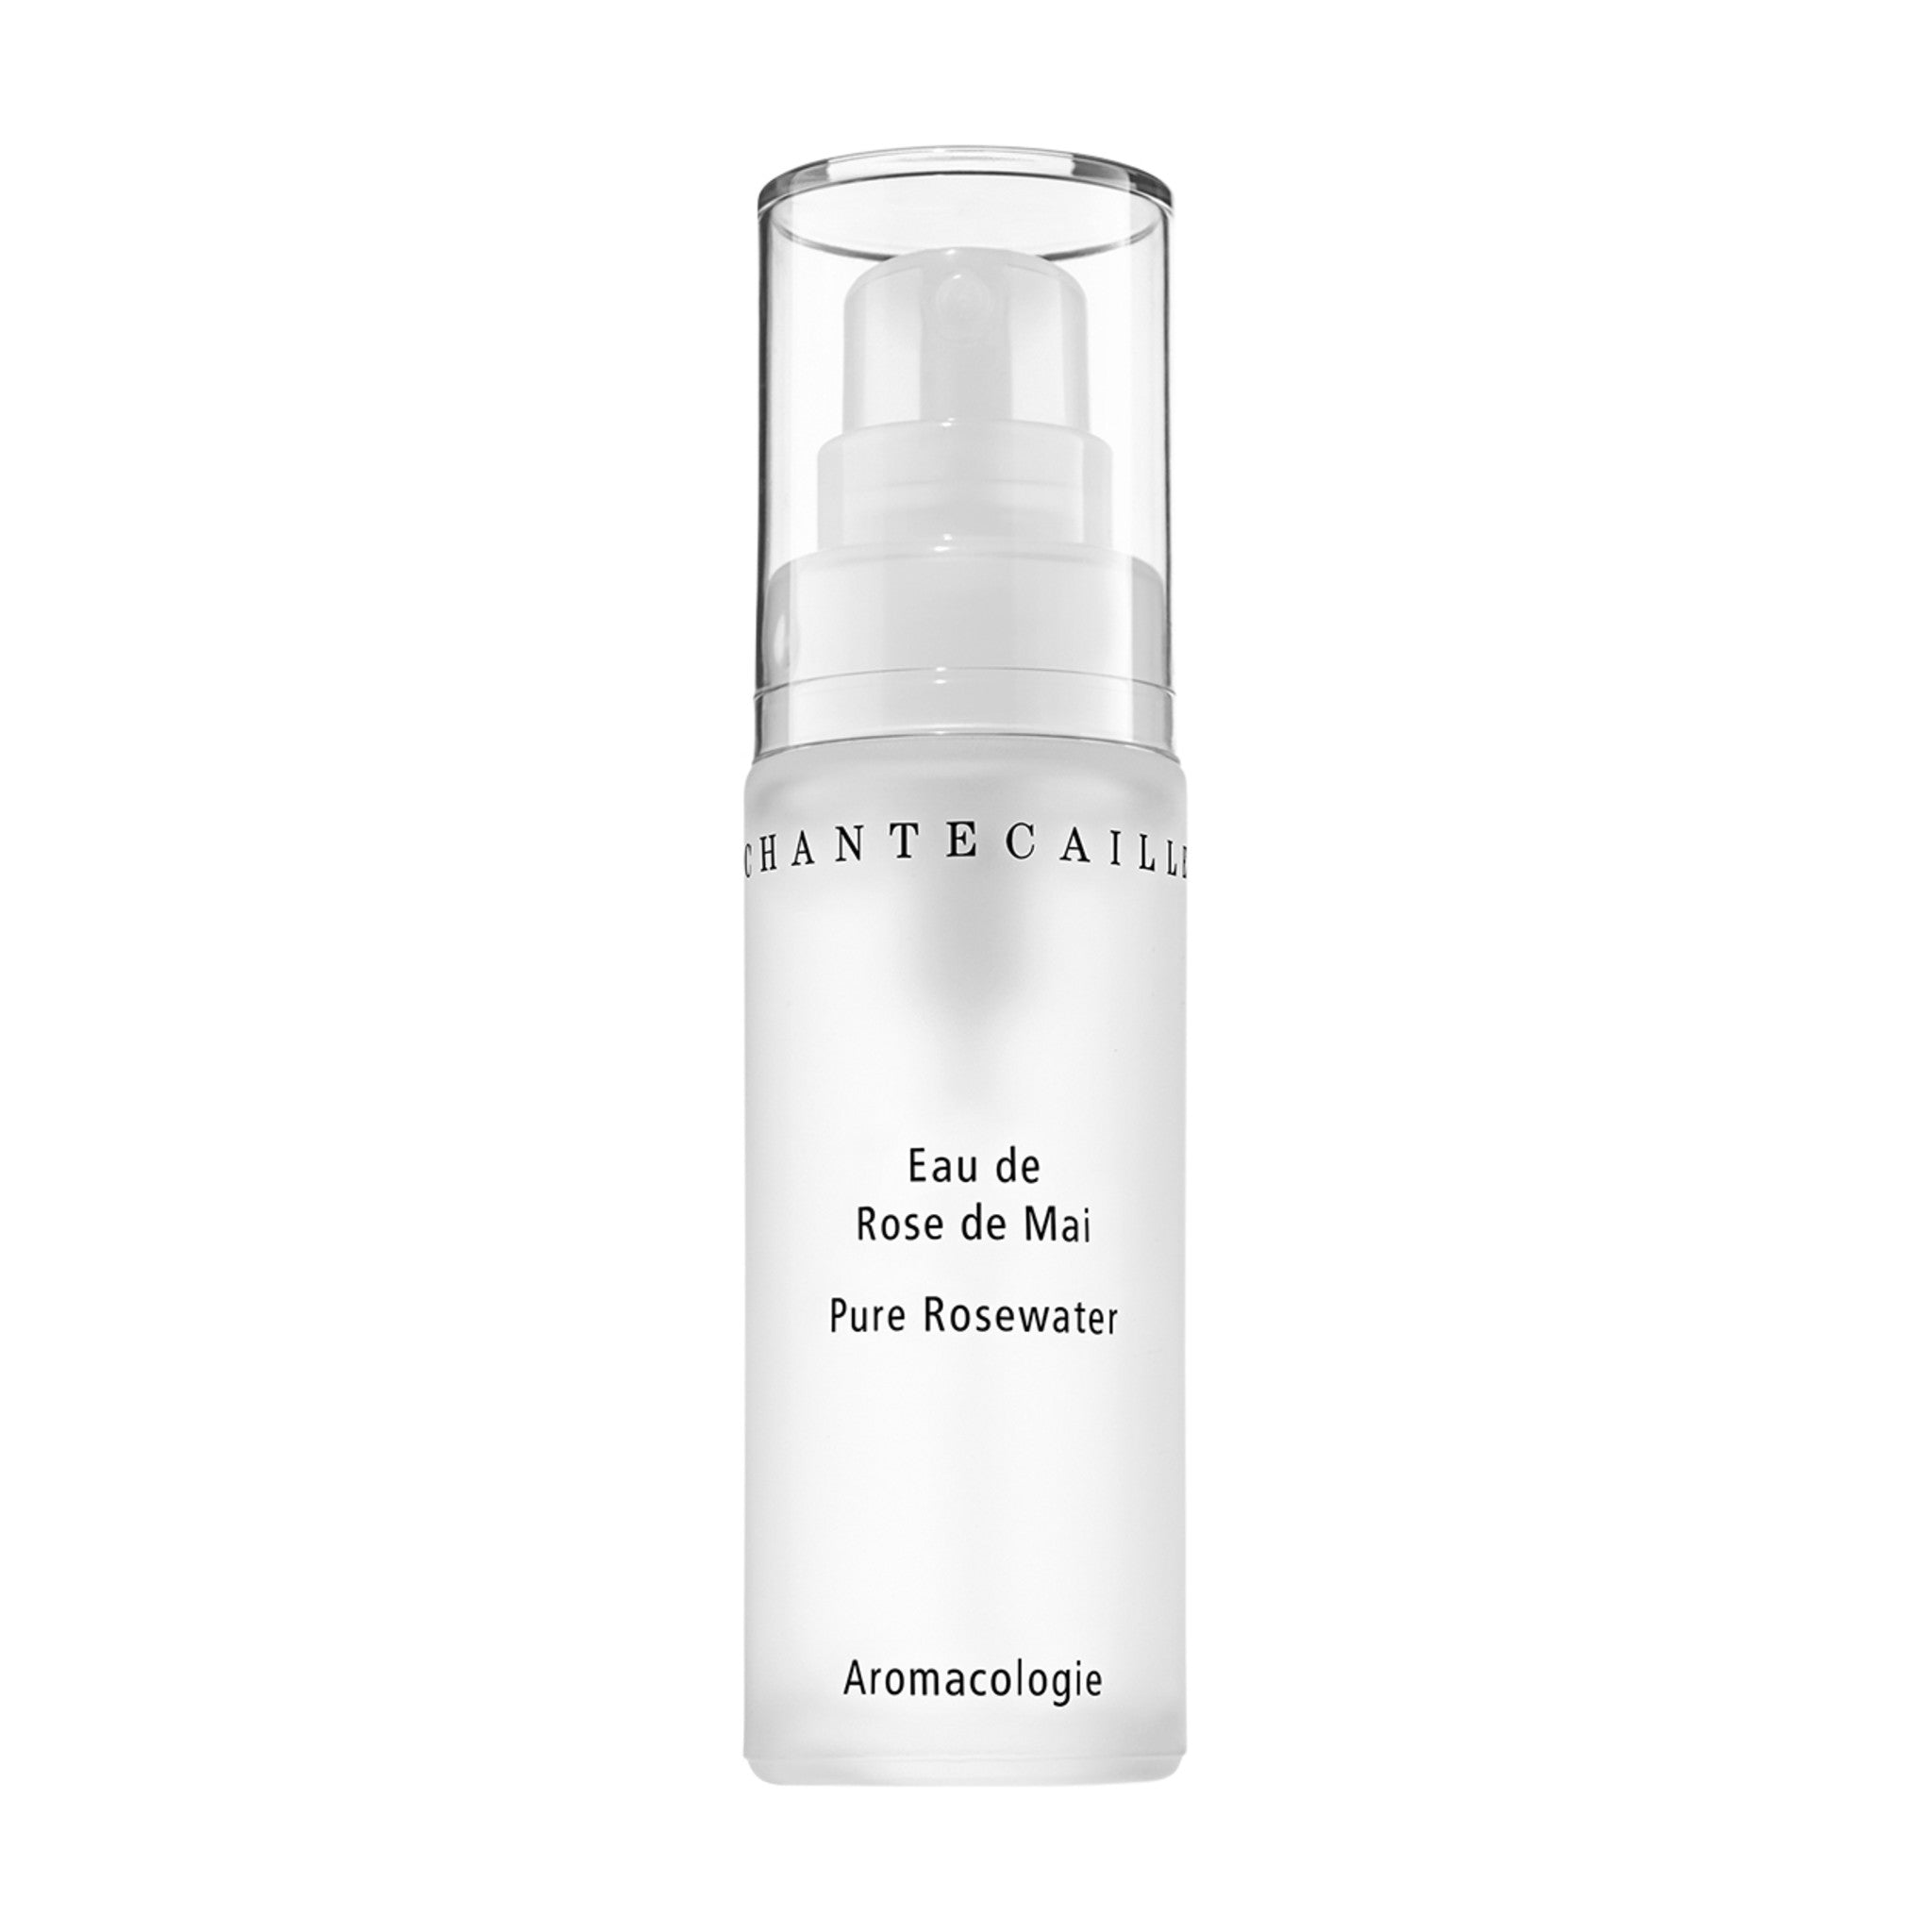 Chantecaille Travel Size Pure Rosewater main image.